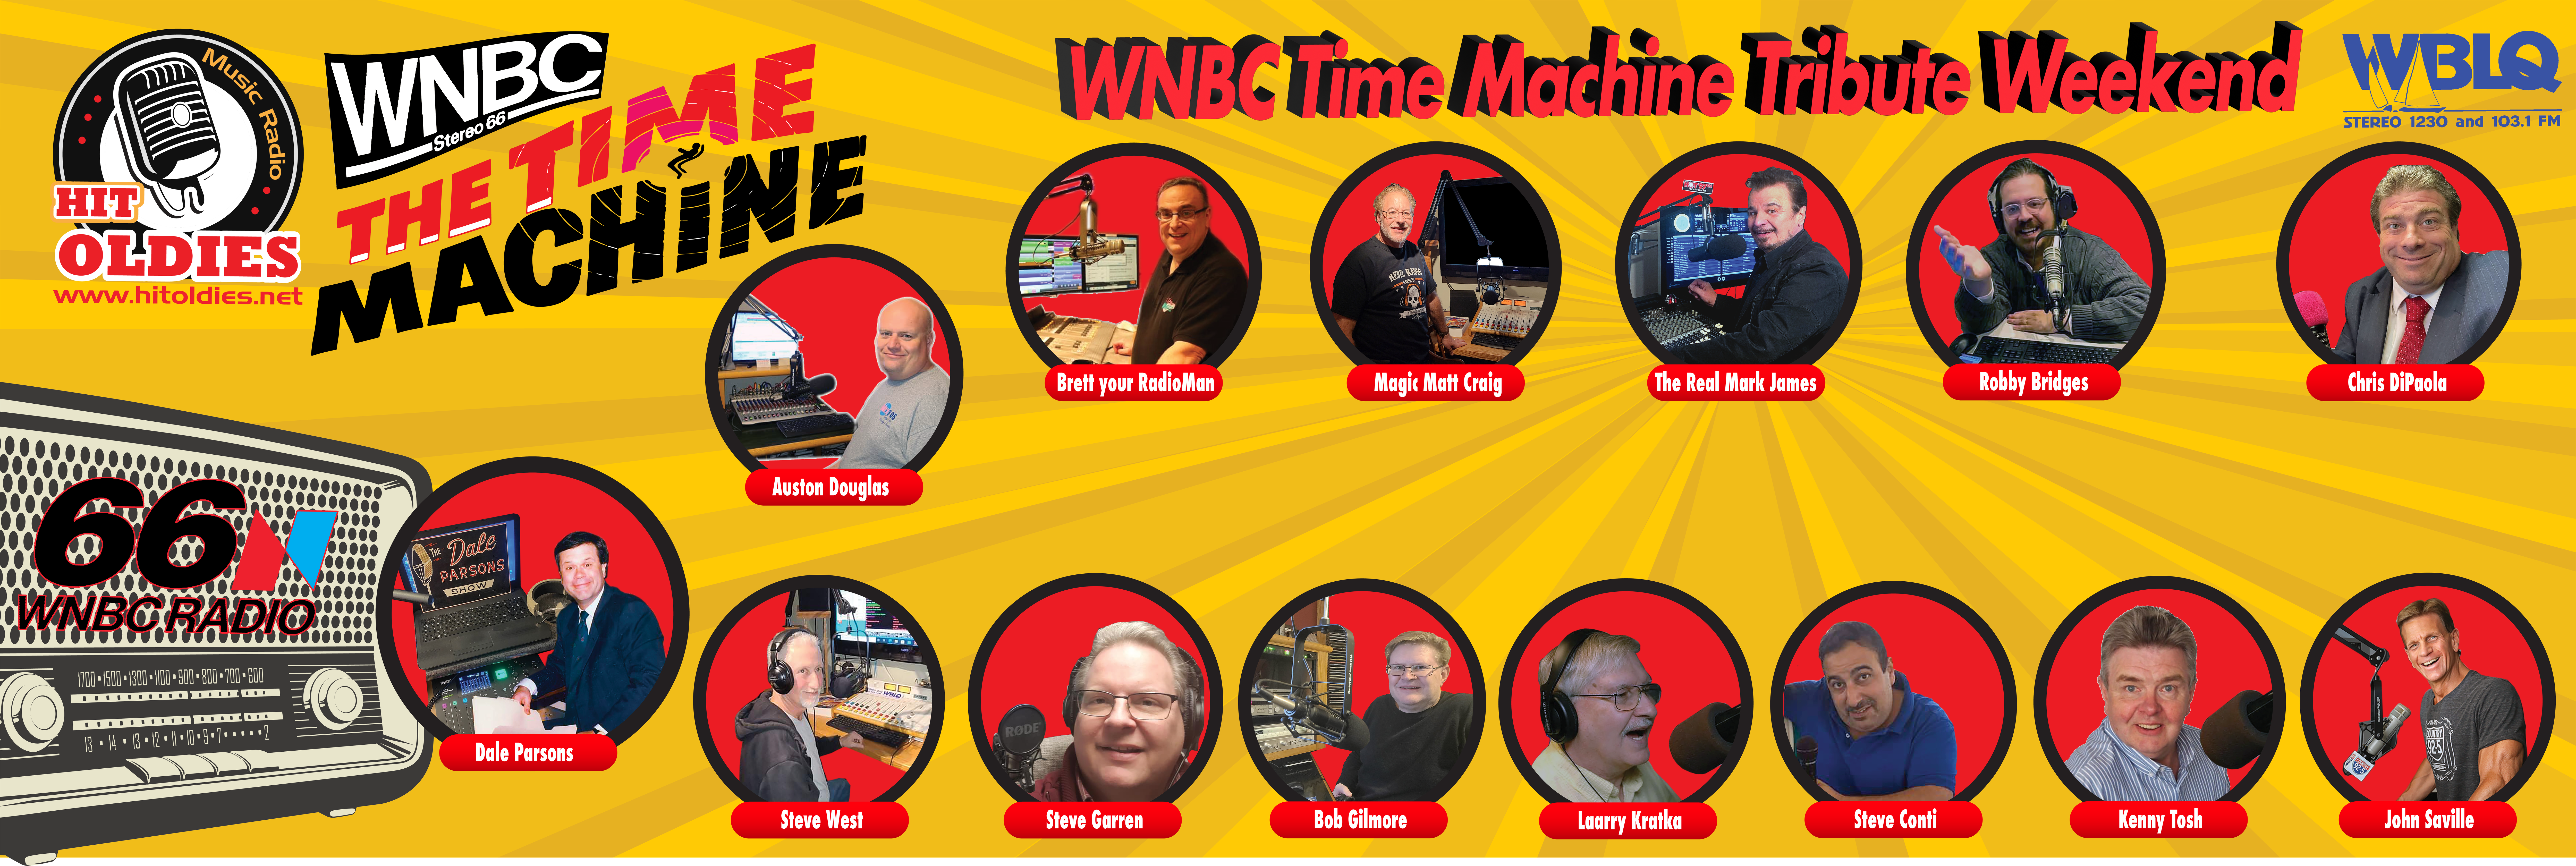 HitOldies and Stereo 1230 WBLQ Present: The WNBC Time Machine!  The Greatest Re-Creation Ever Done – All-New Performances!